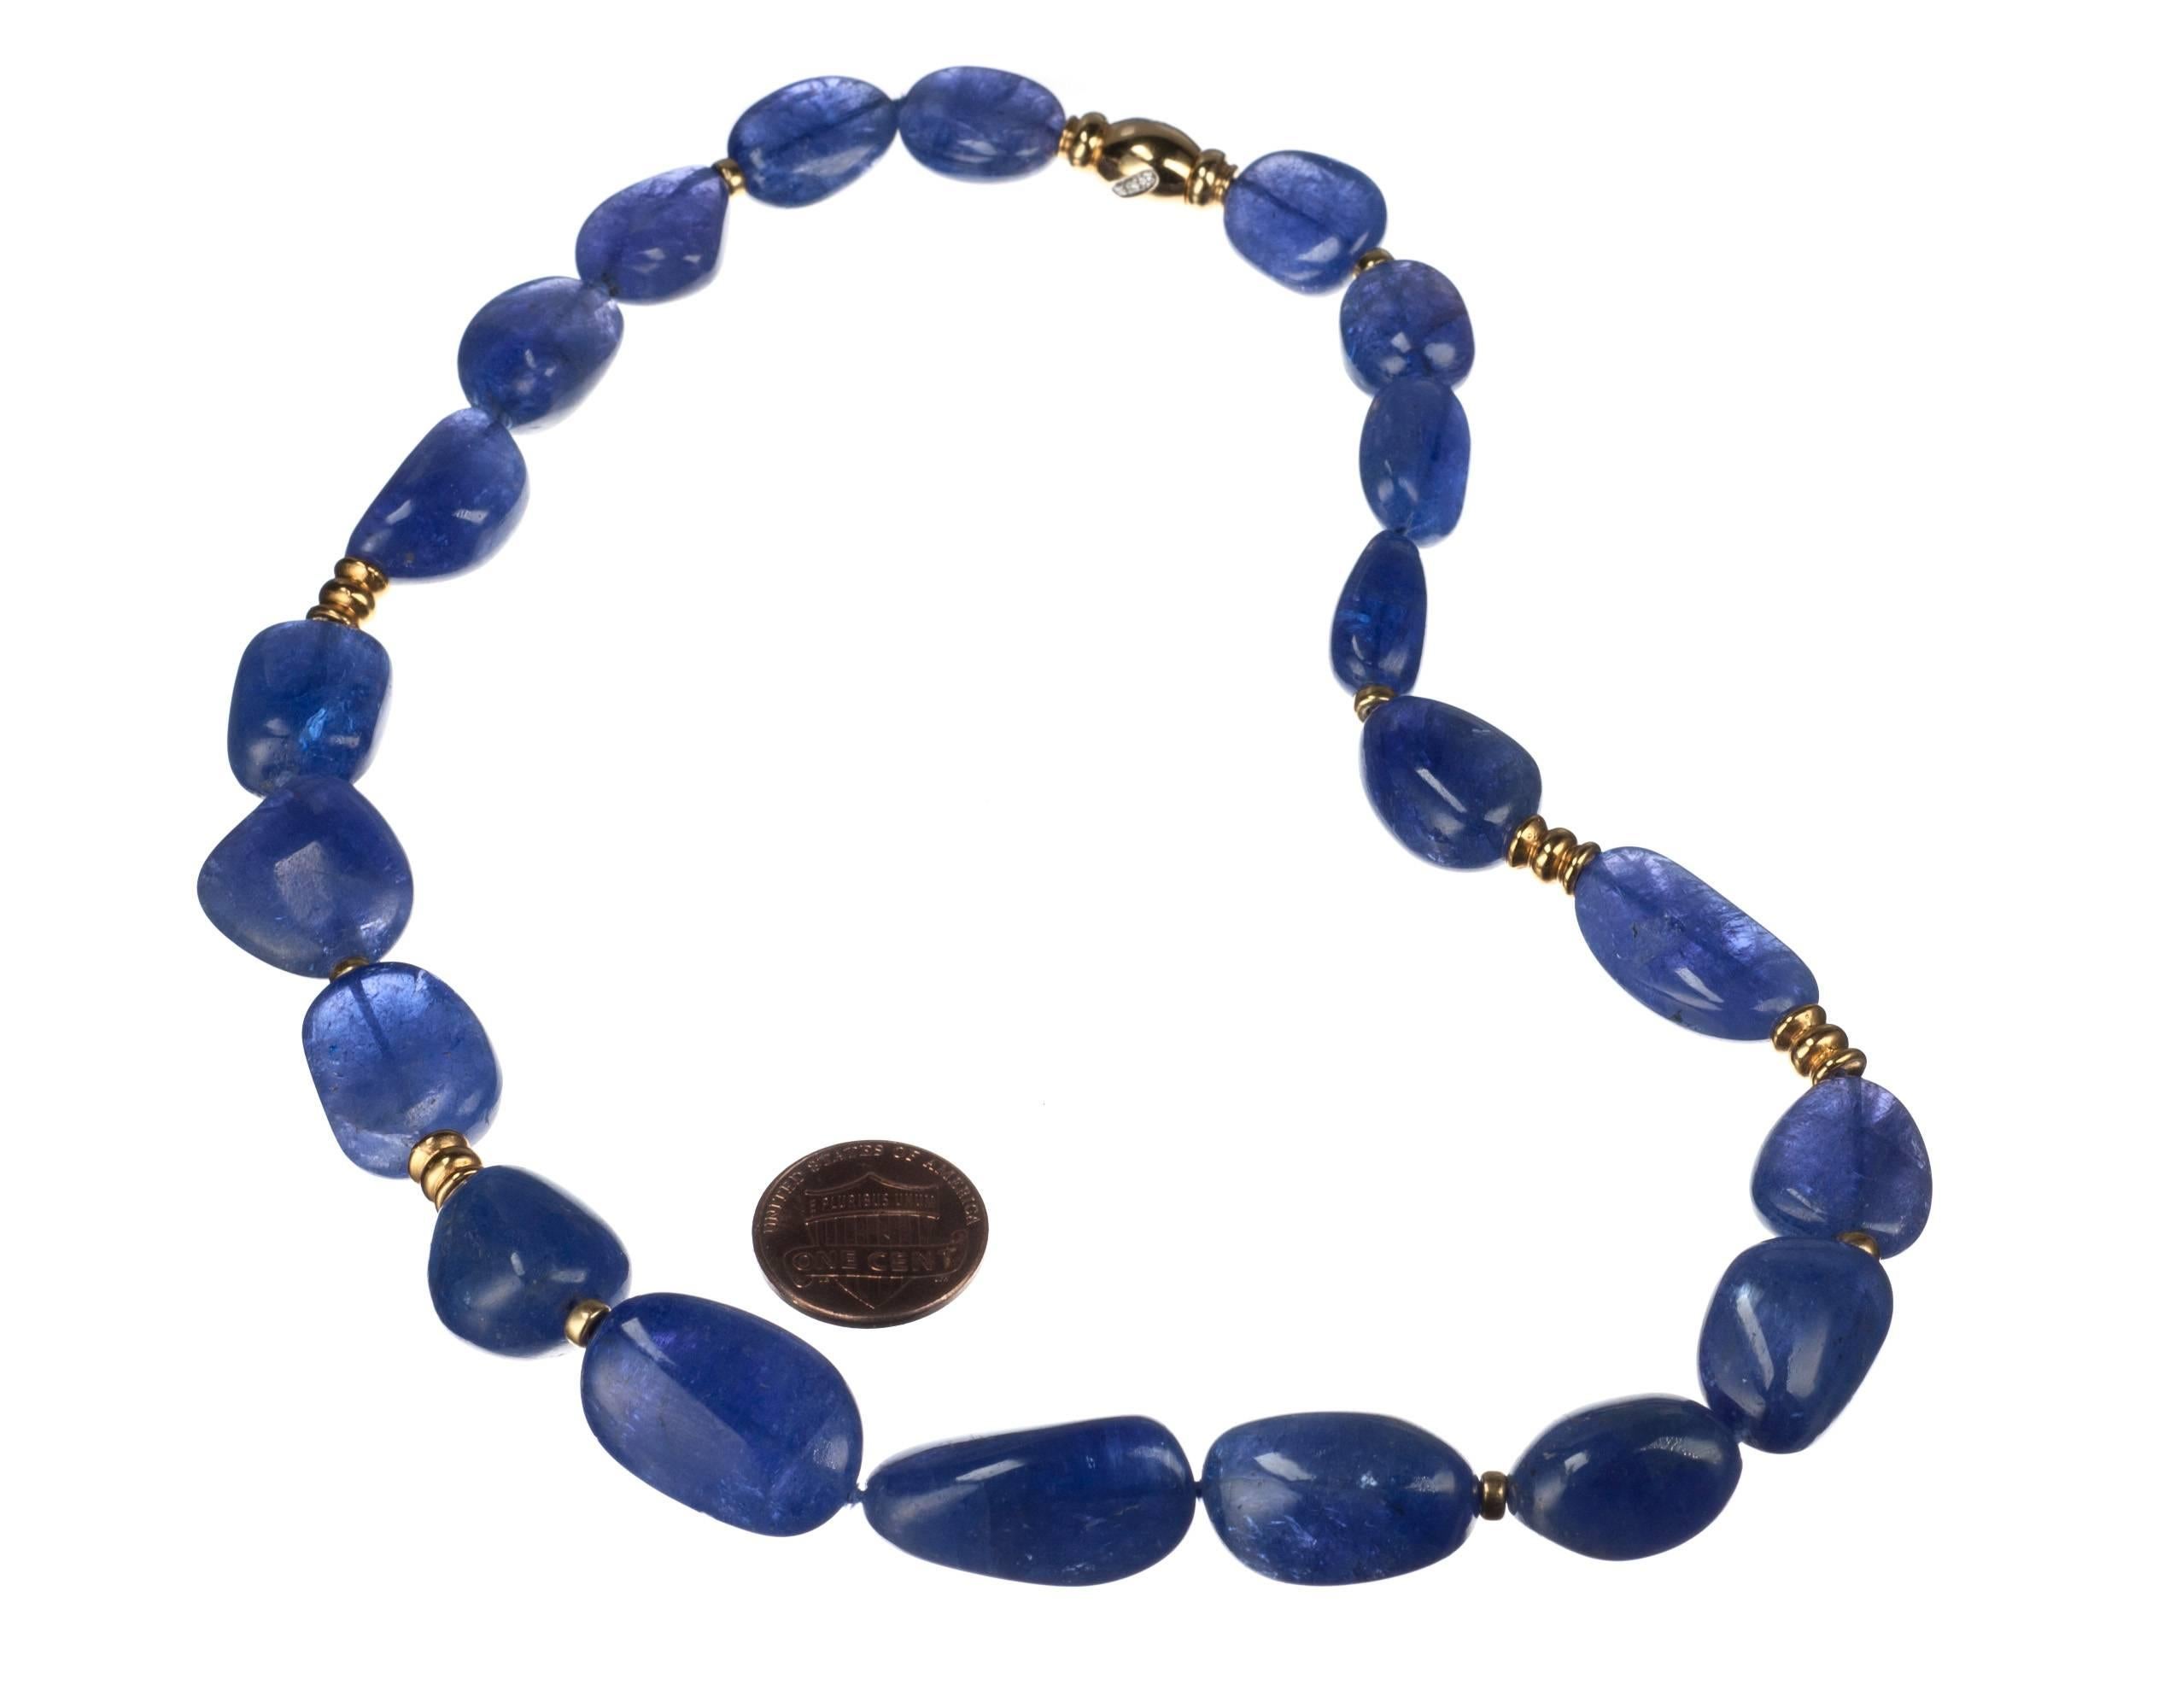 Created by Elleard Heffern Fine Jewelers, a necklace of polished tanzanite nugget beads strung with 18-karat yellow gold beads and rondelles. The 18-karat yellow gold clasp is accented with 9 brilliant-cut round diamonds, .12ctw. of G-H color and VS